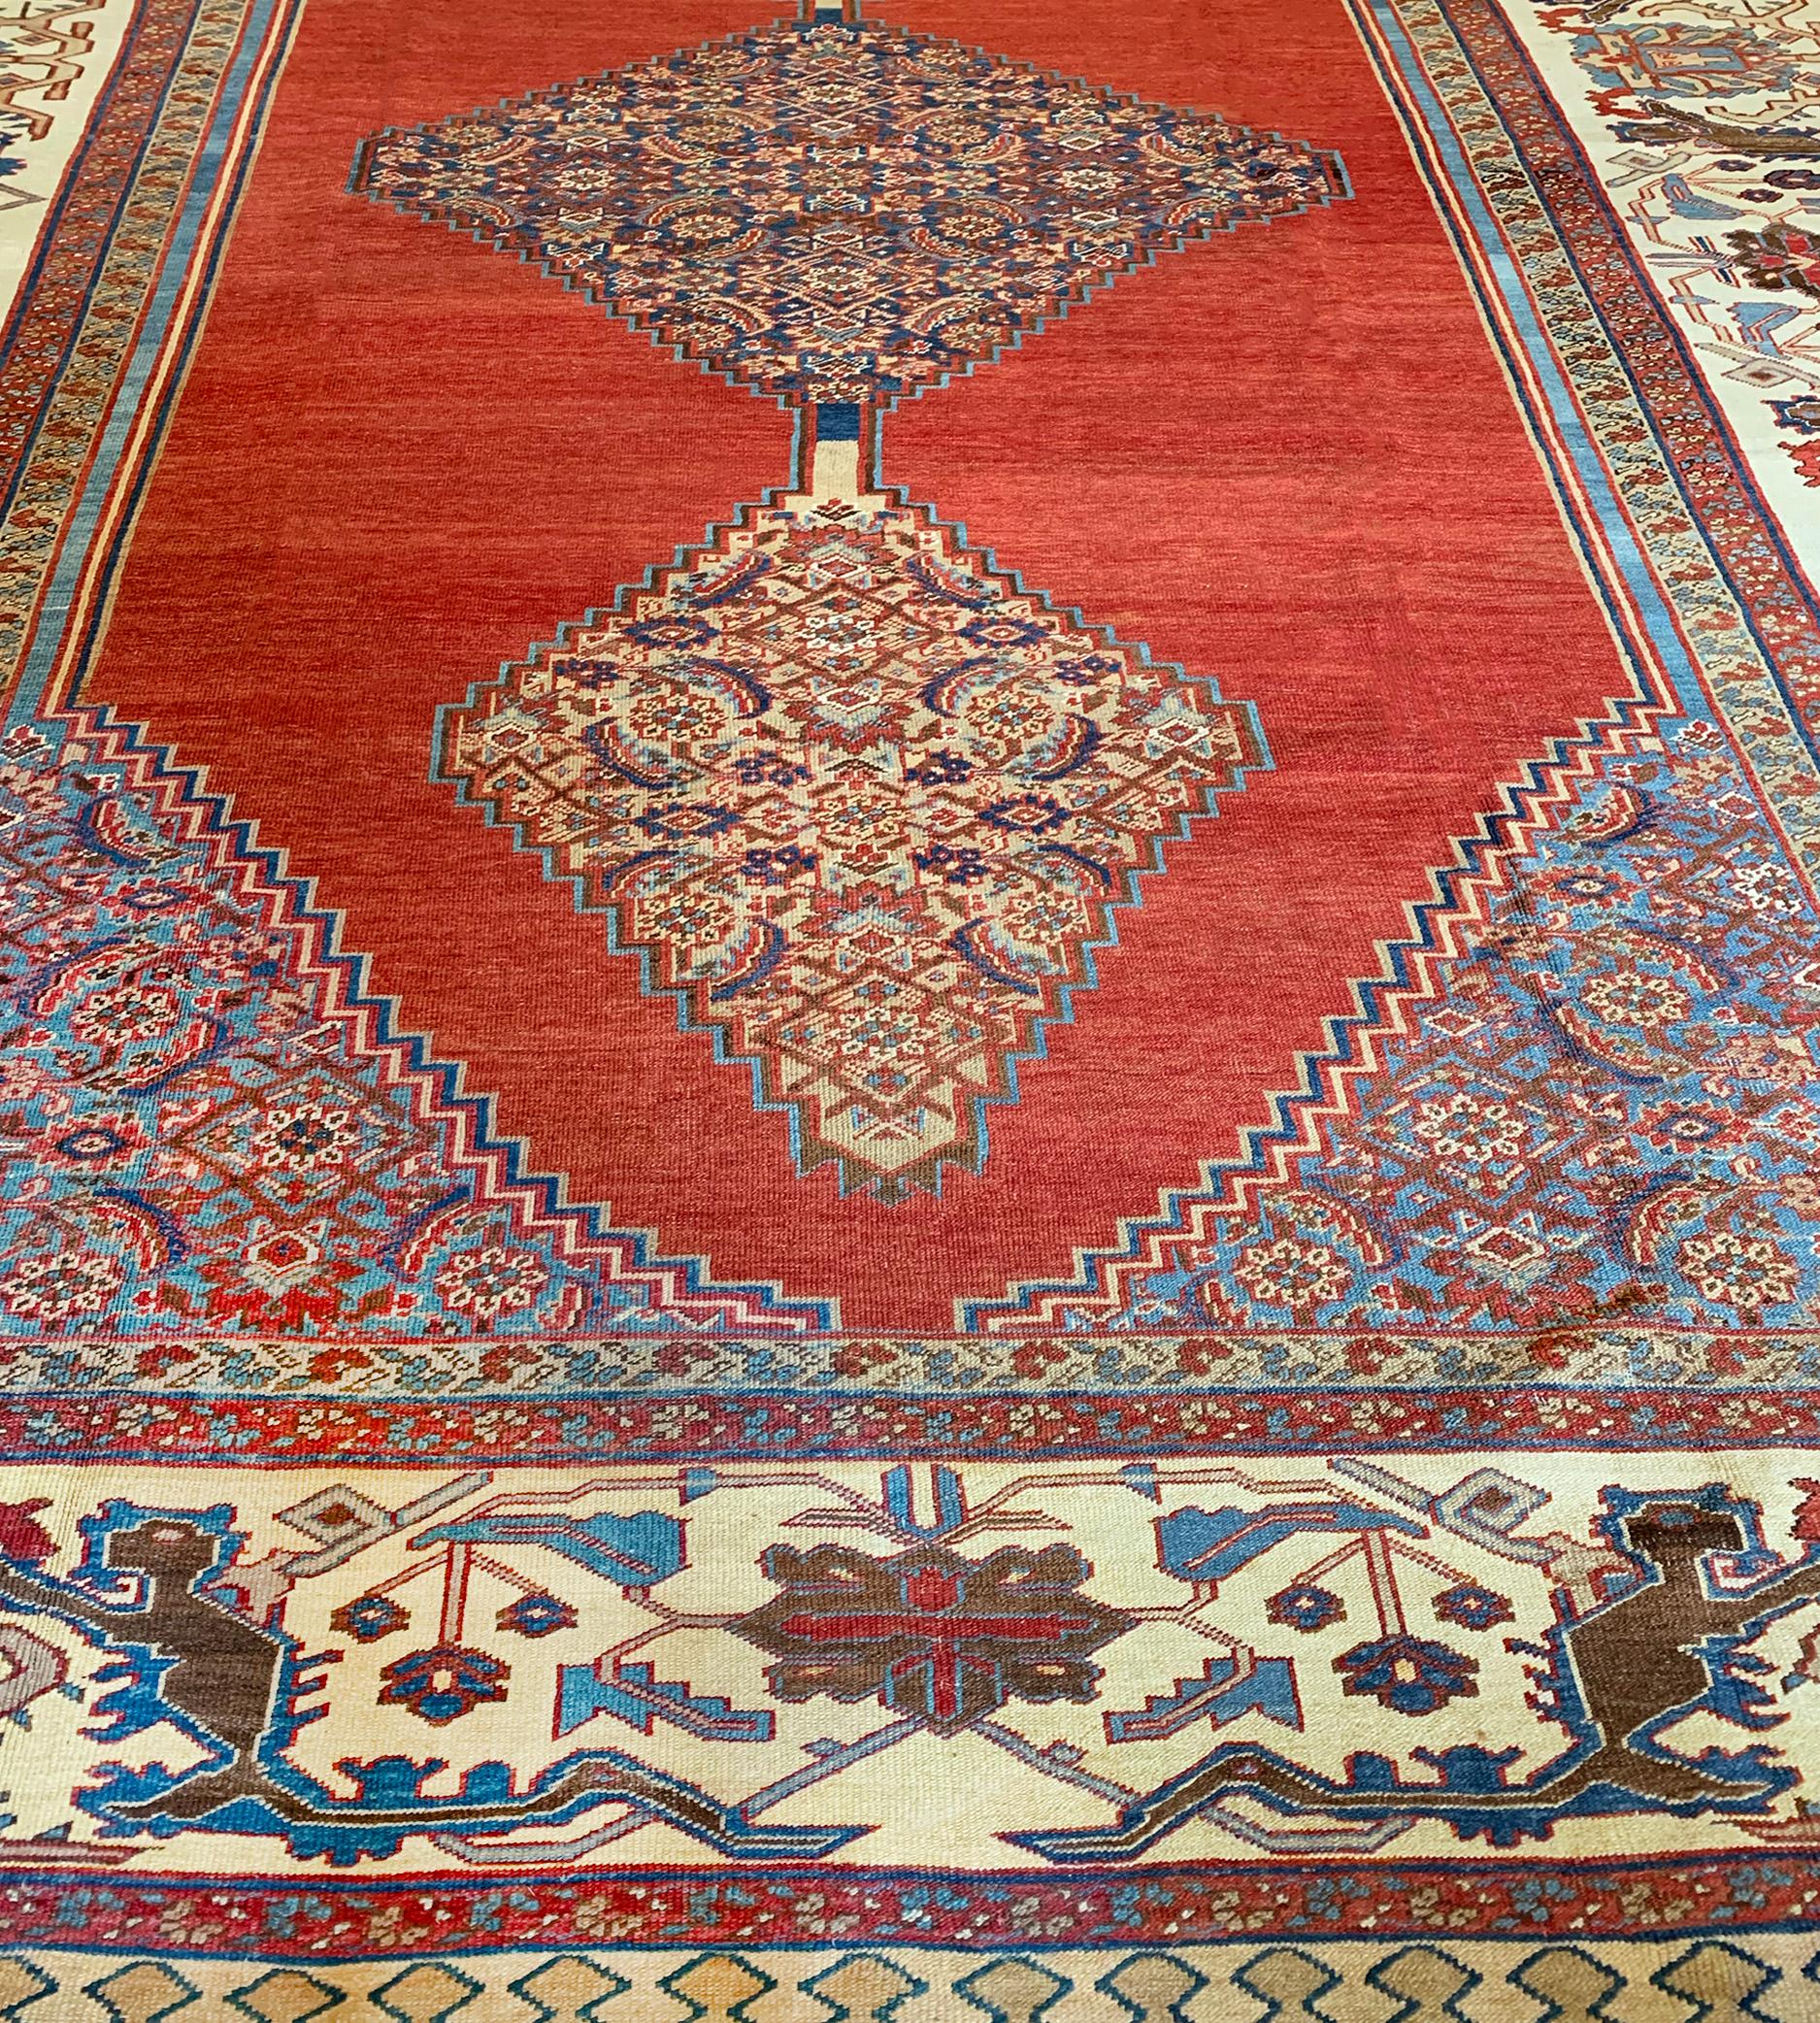 Persian Hand-Woven Late 19th Century Wool Bakhshaish Rug For Sale